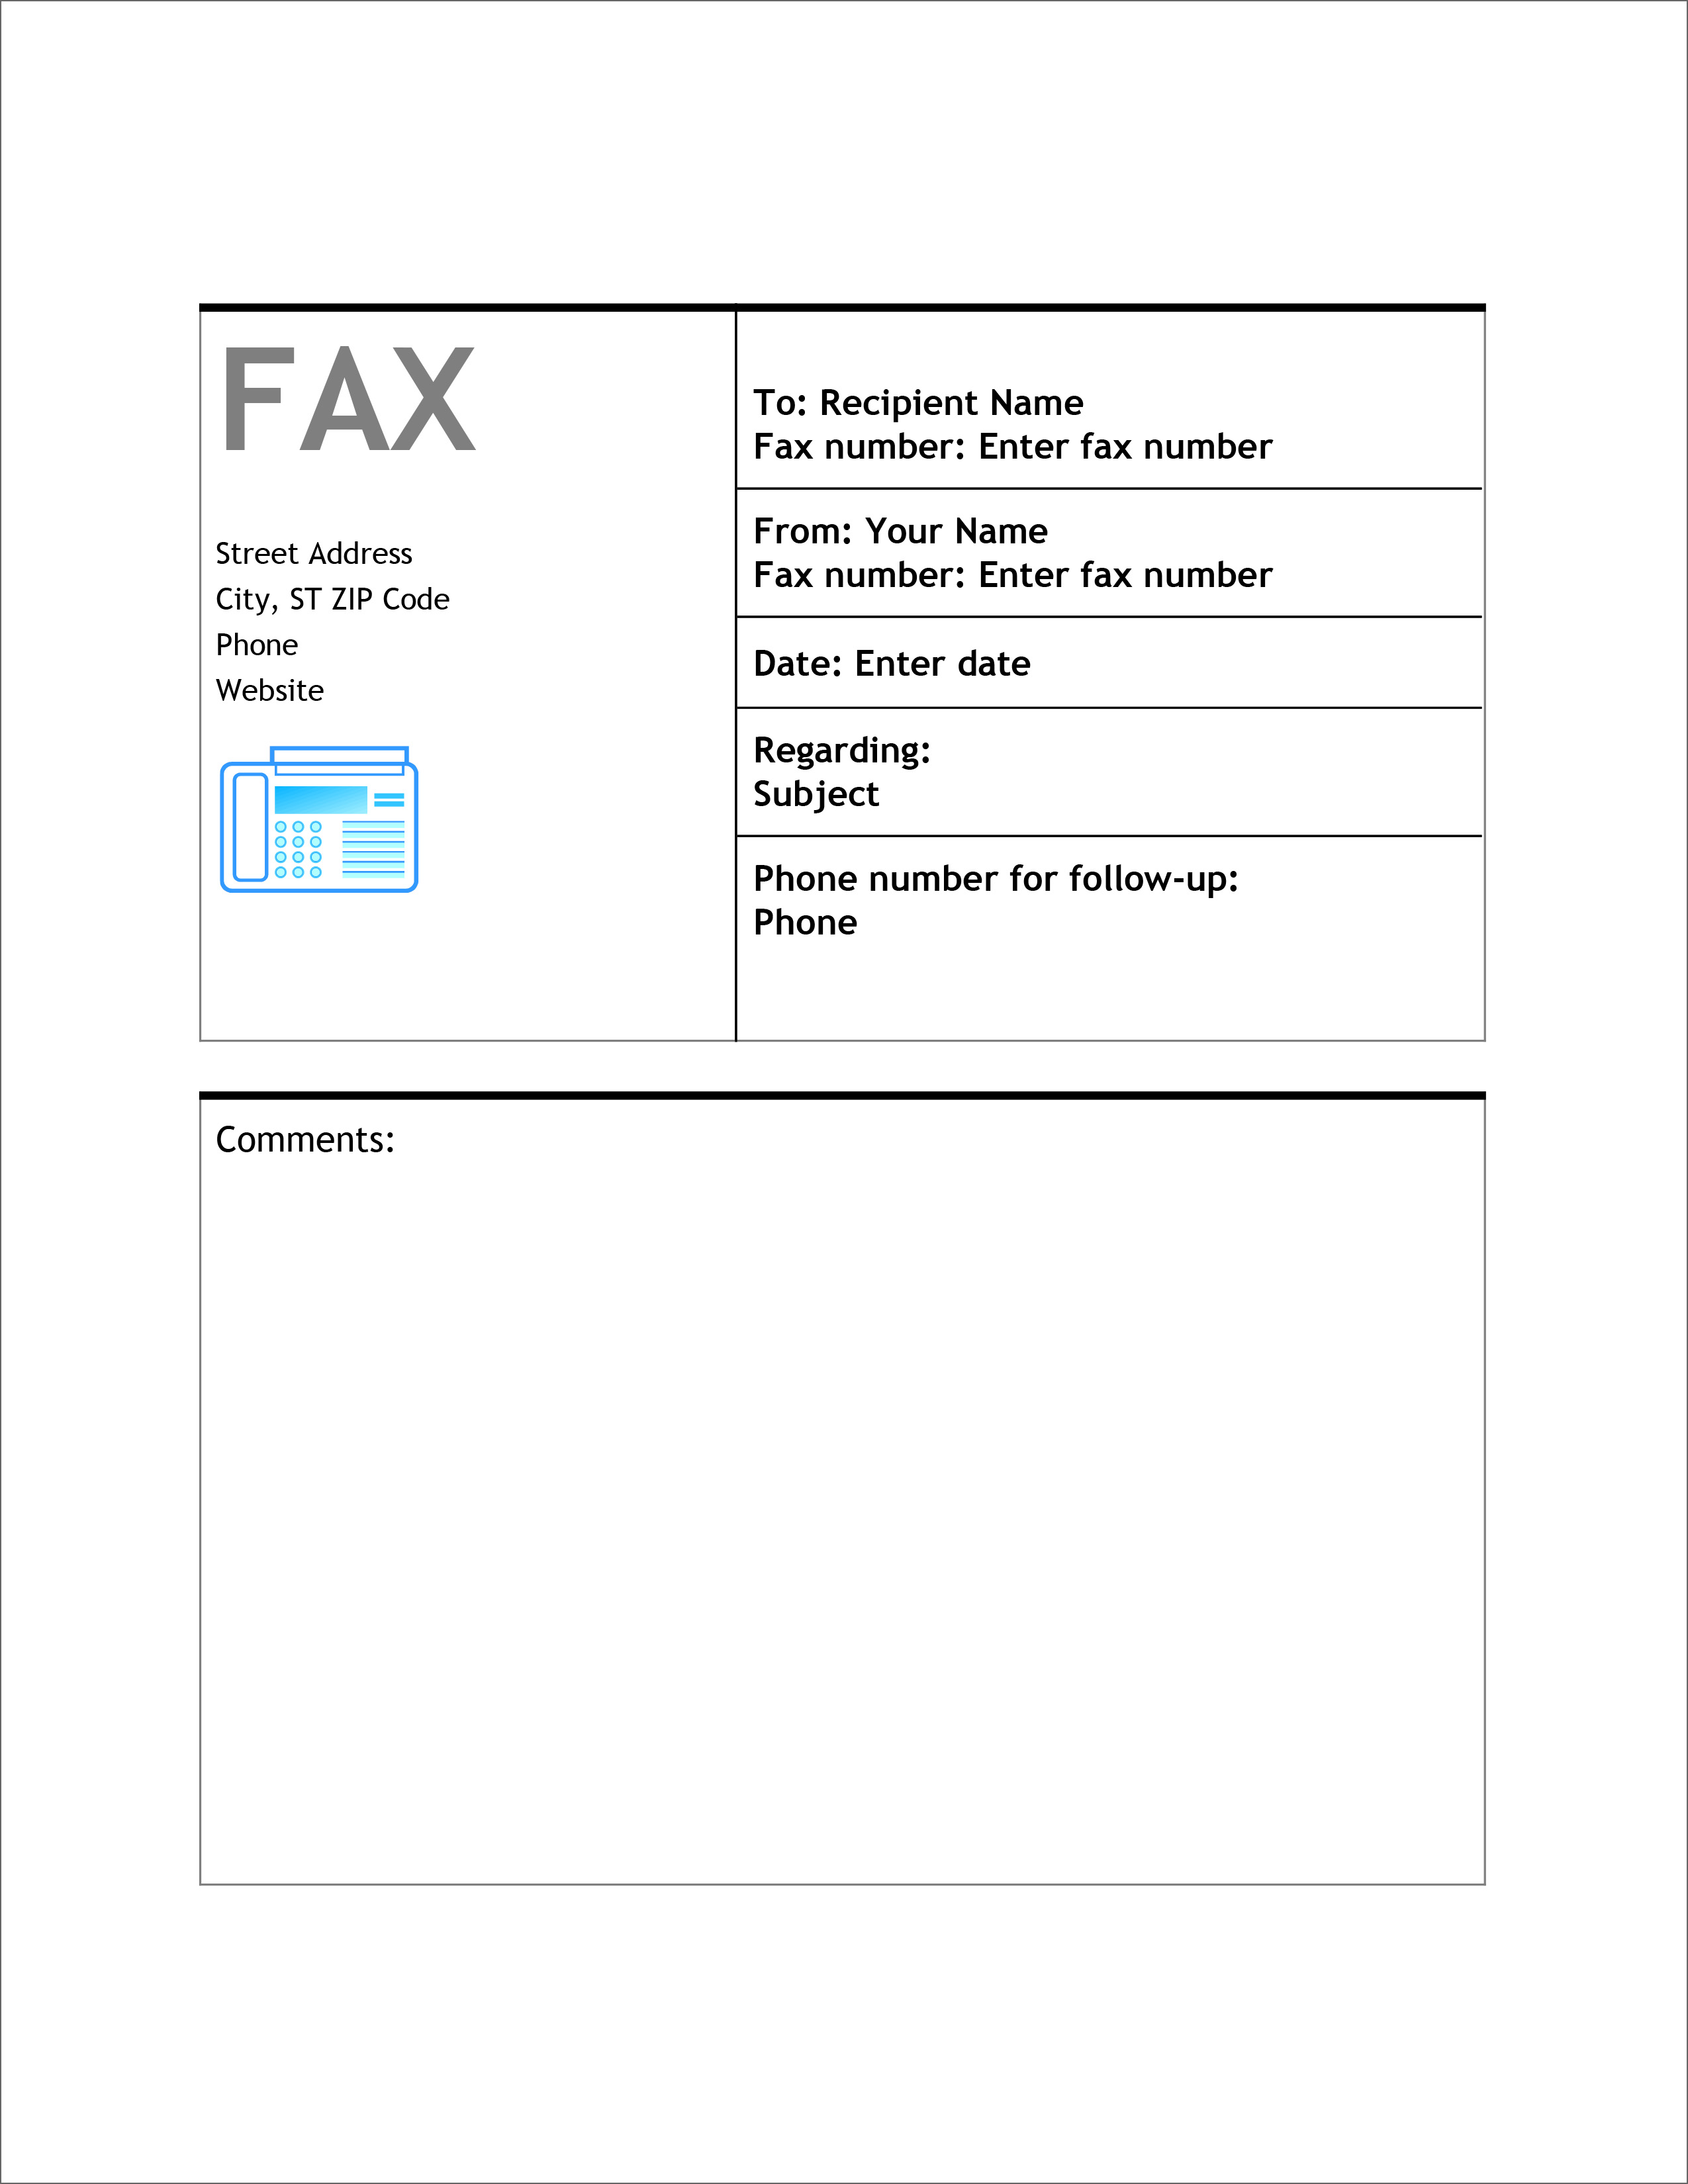 apple pages fax cover sheet template